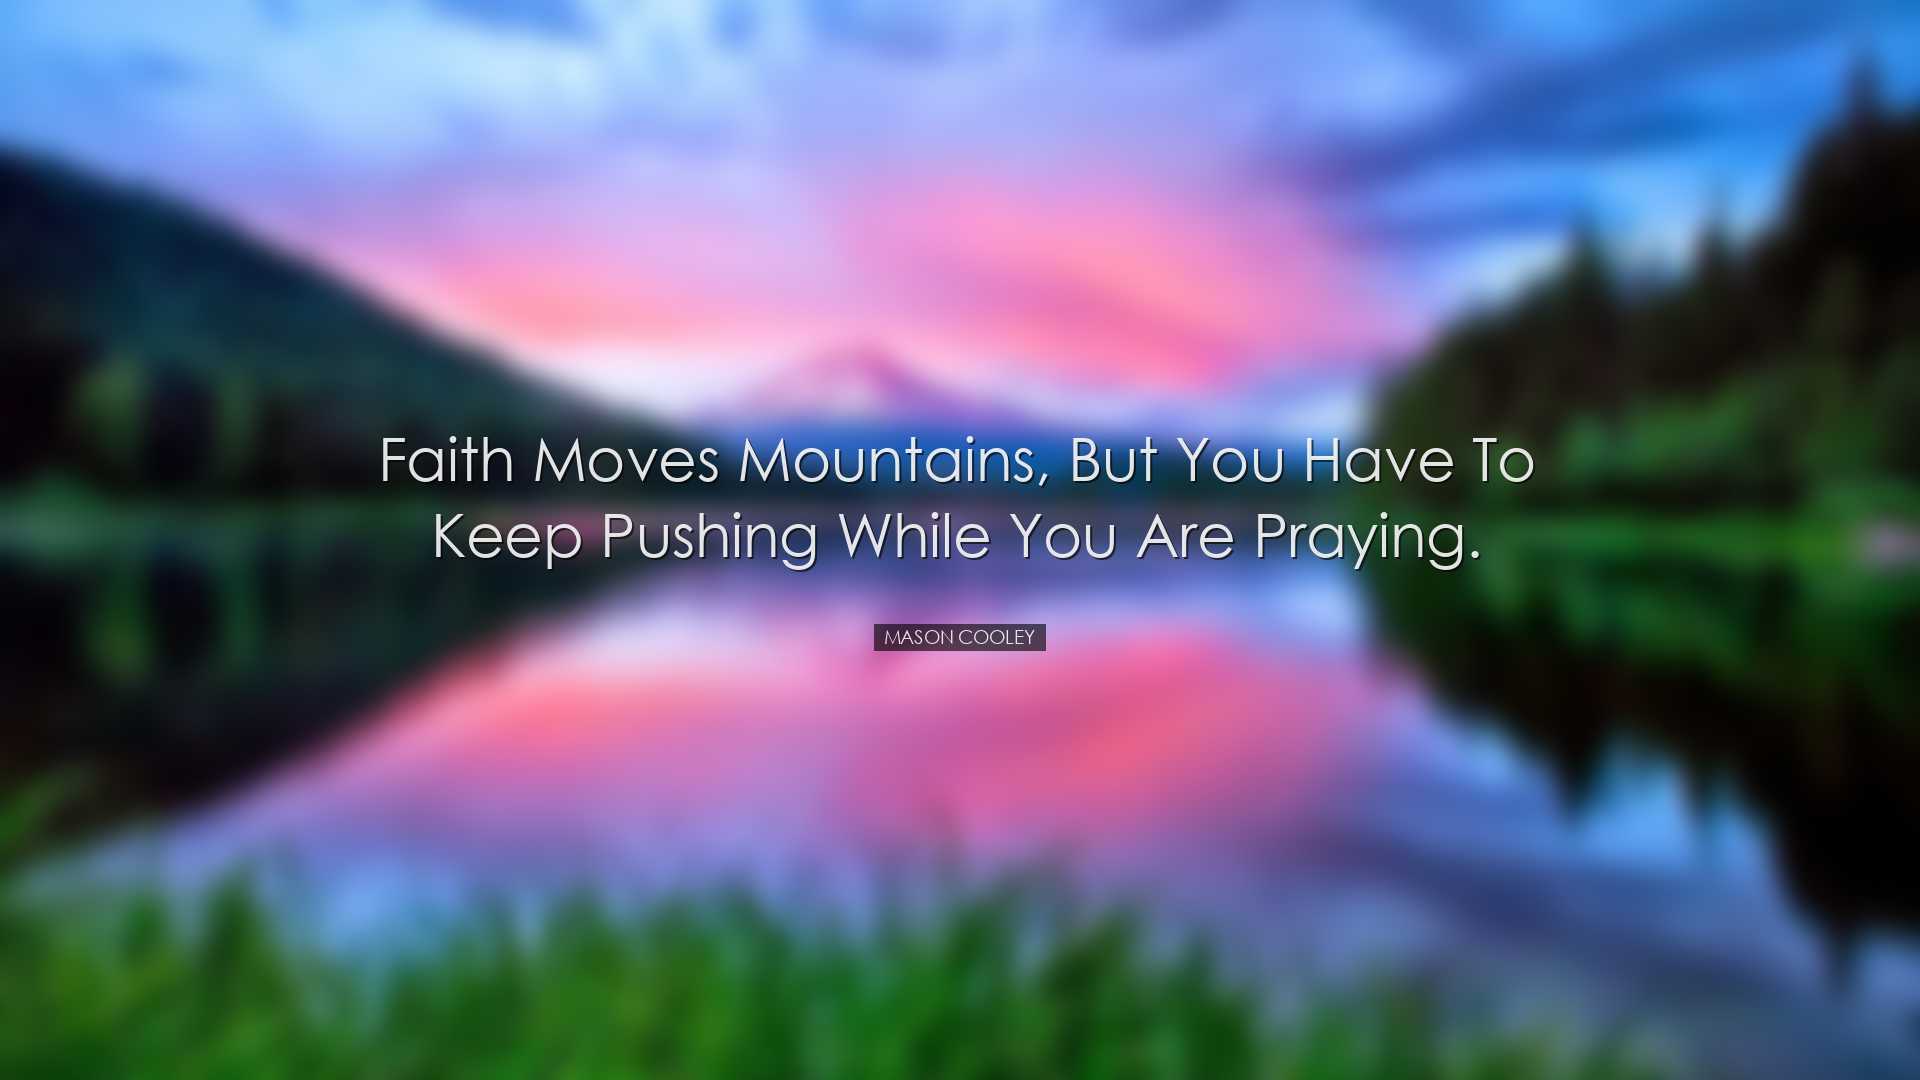 Faith moves mountains, but you have to keep pushing while you are